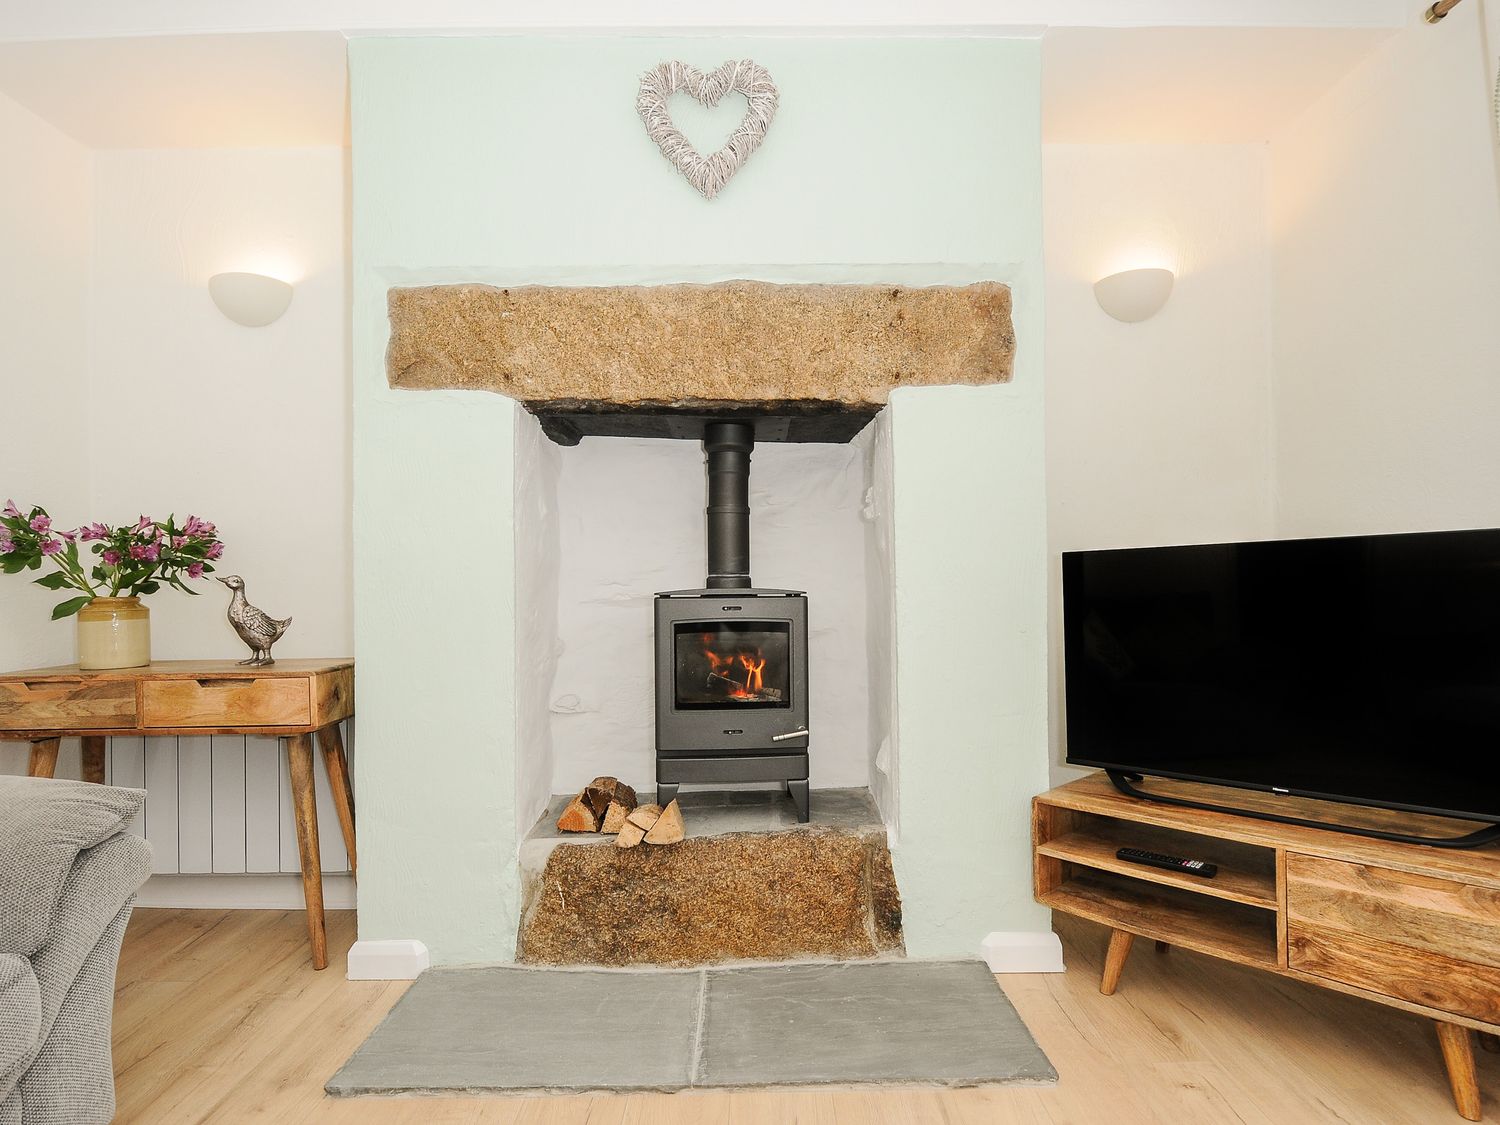 Carvannel Cottages, Portreath, Cornwall. Three bedrooms. Pet-friendly. Enclosed garden with hot tub.